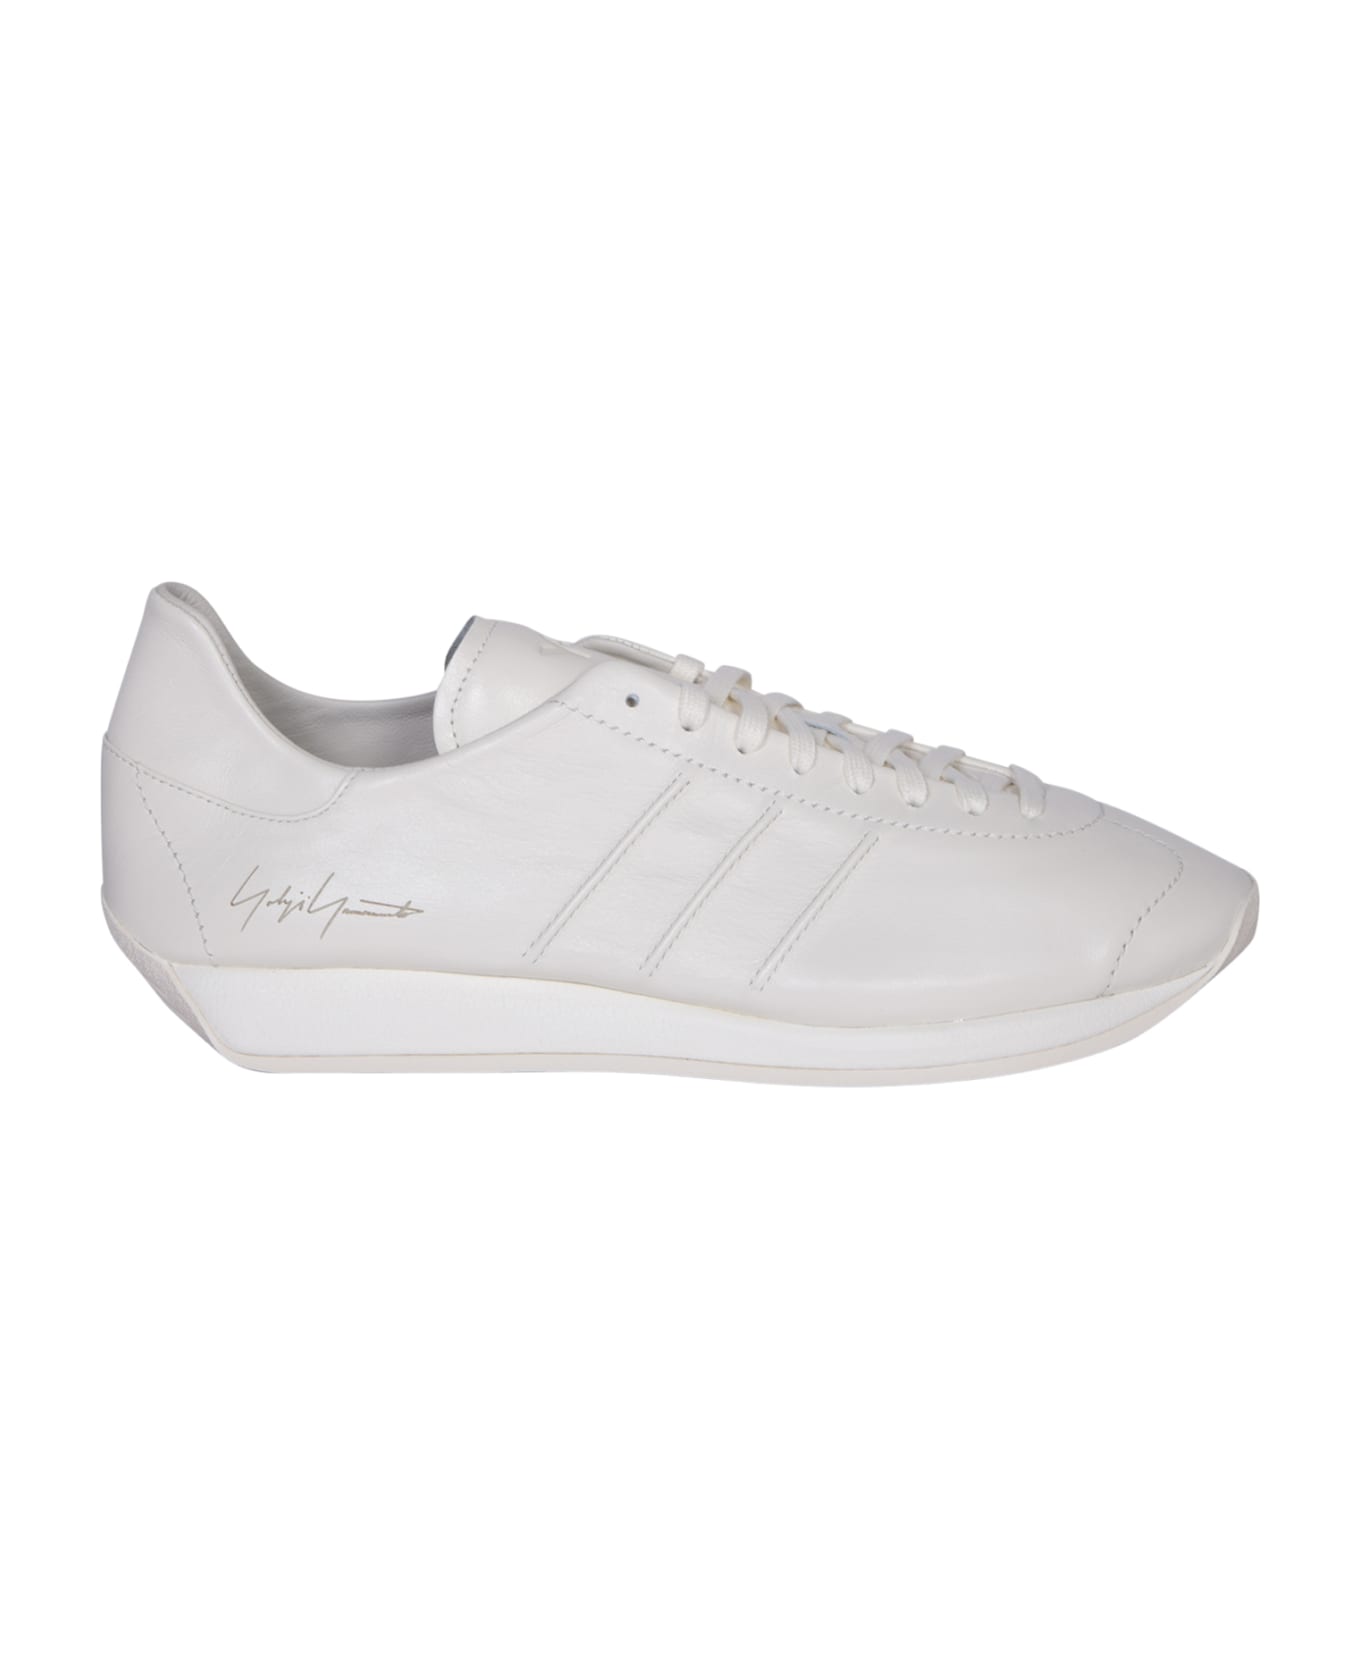 Y-3 Adidas Y-3 Country White Sneakers - White